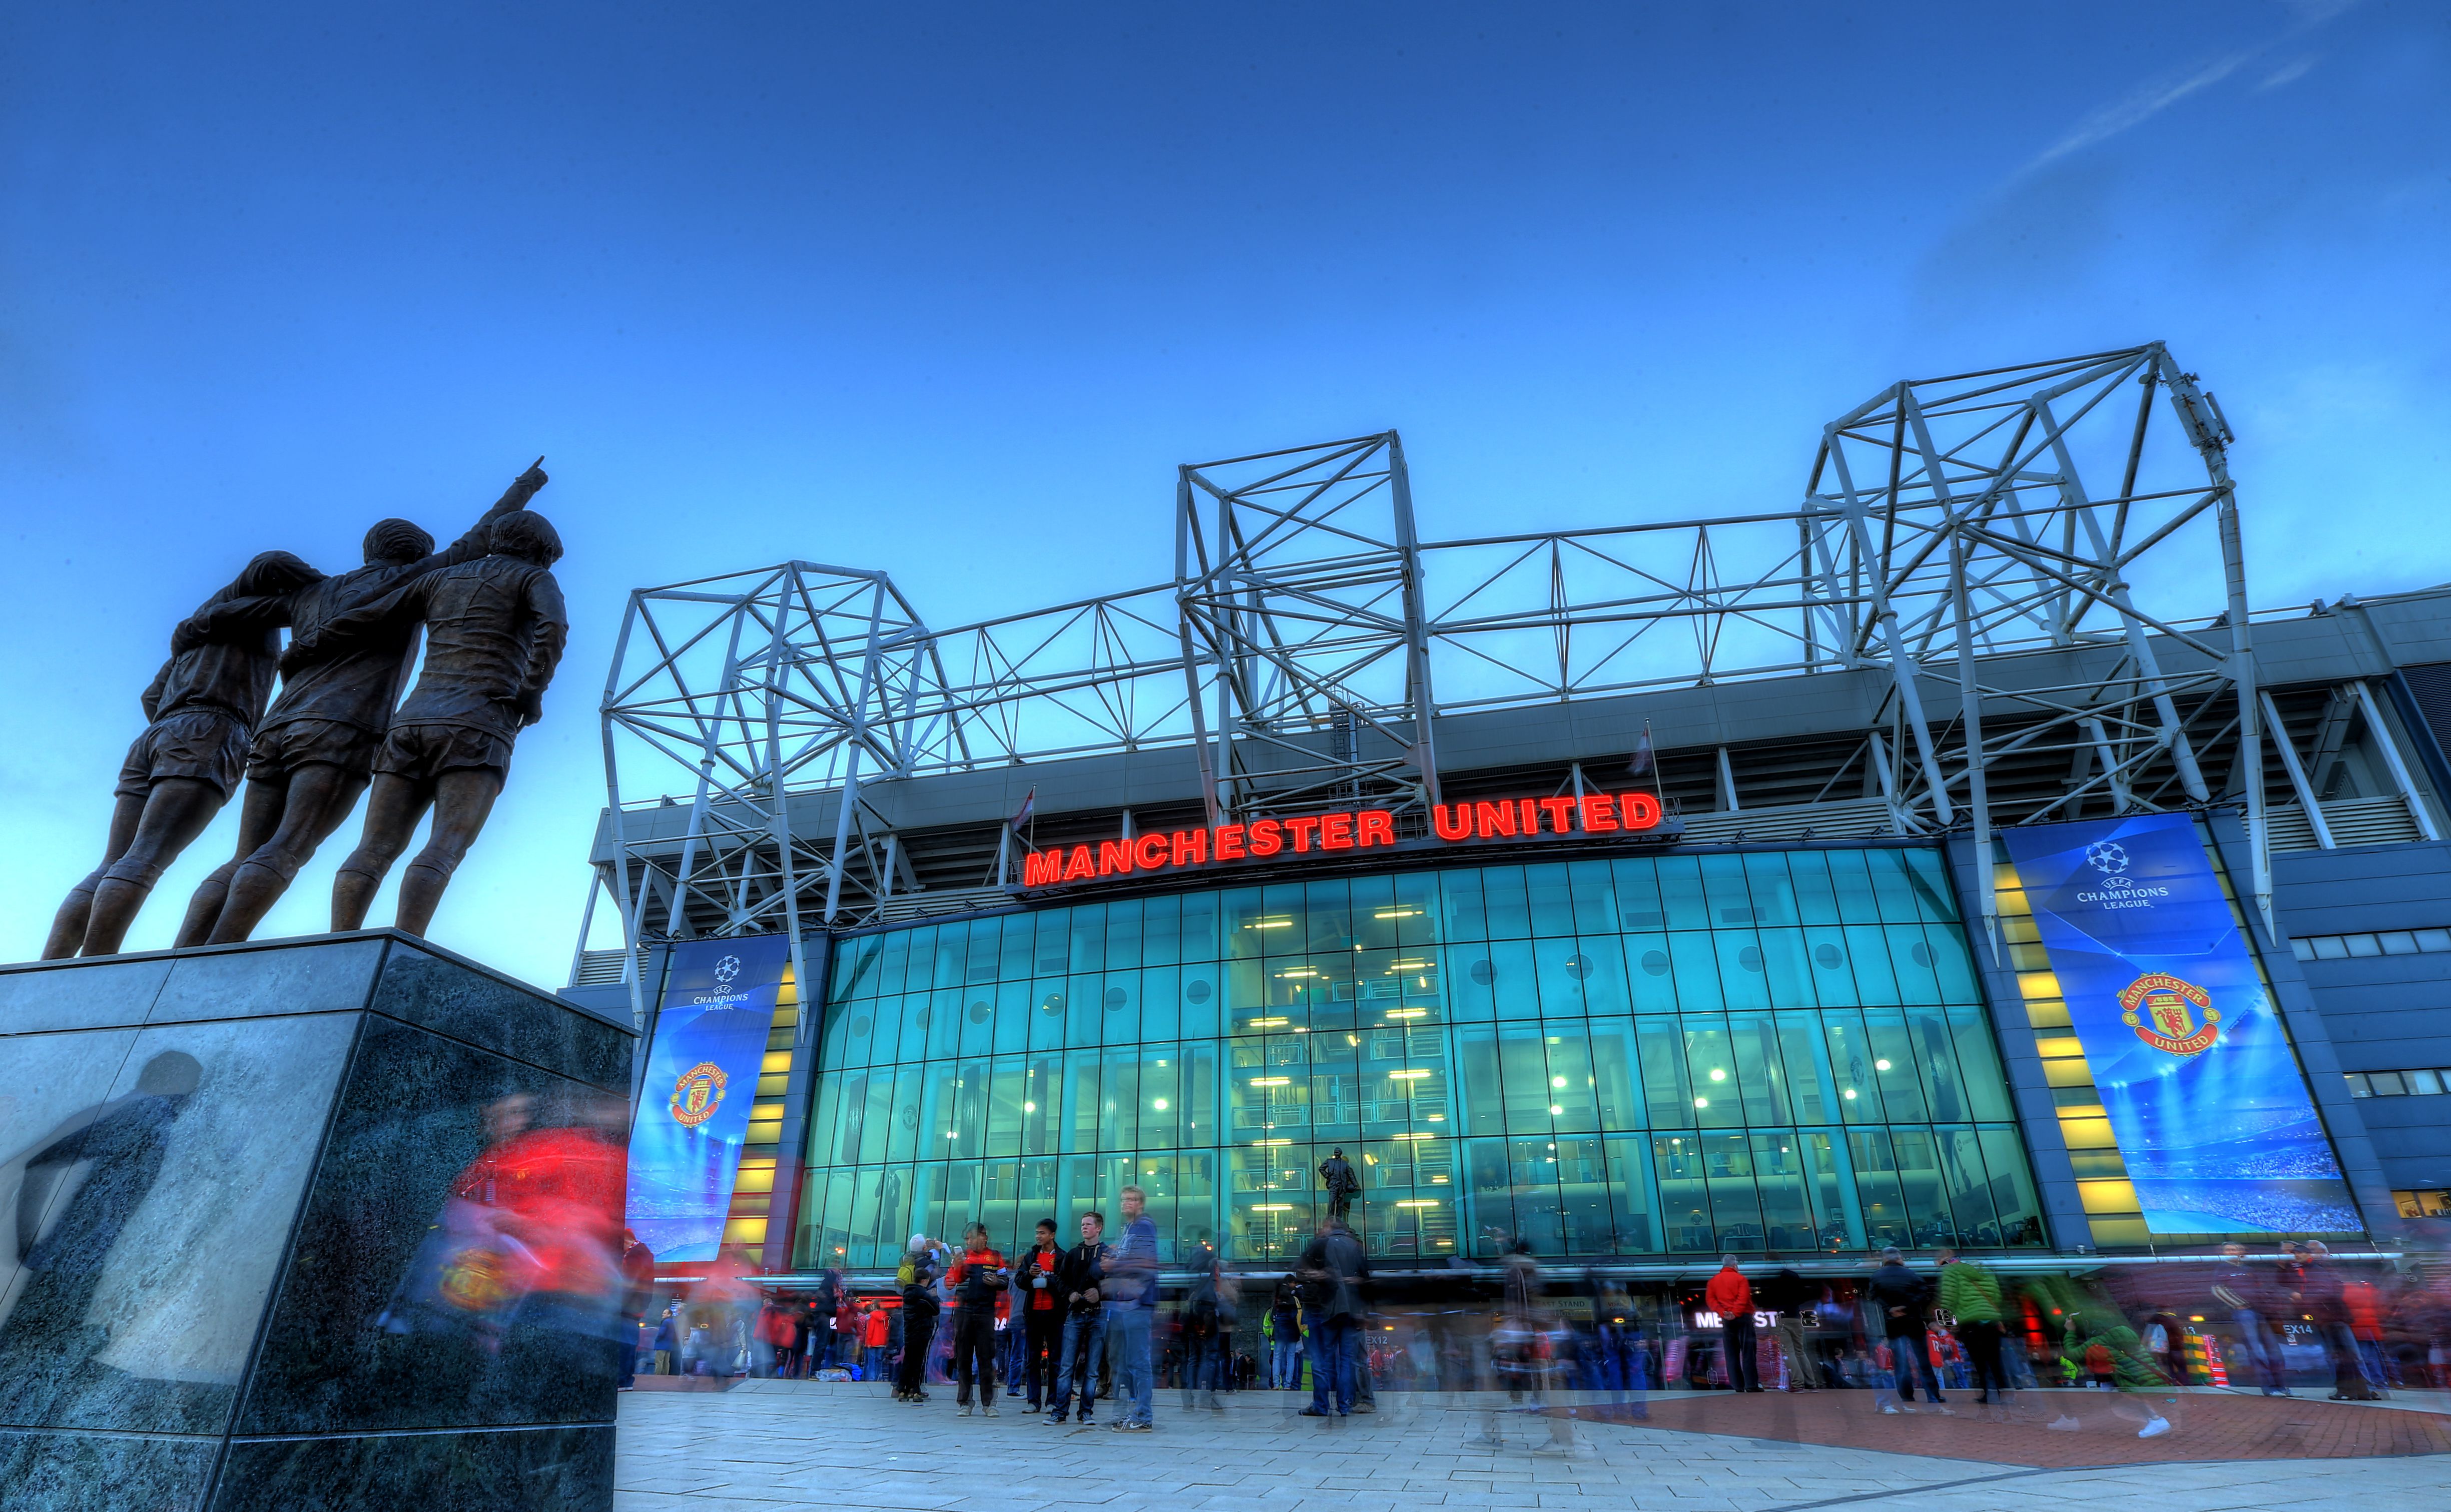 General view of outside of Old Trafford